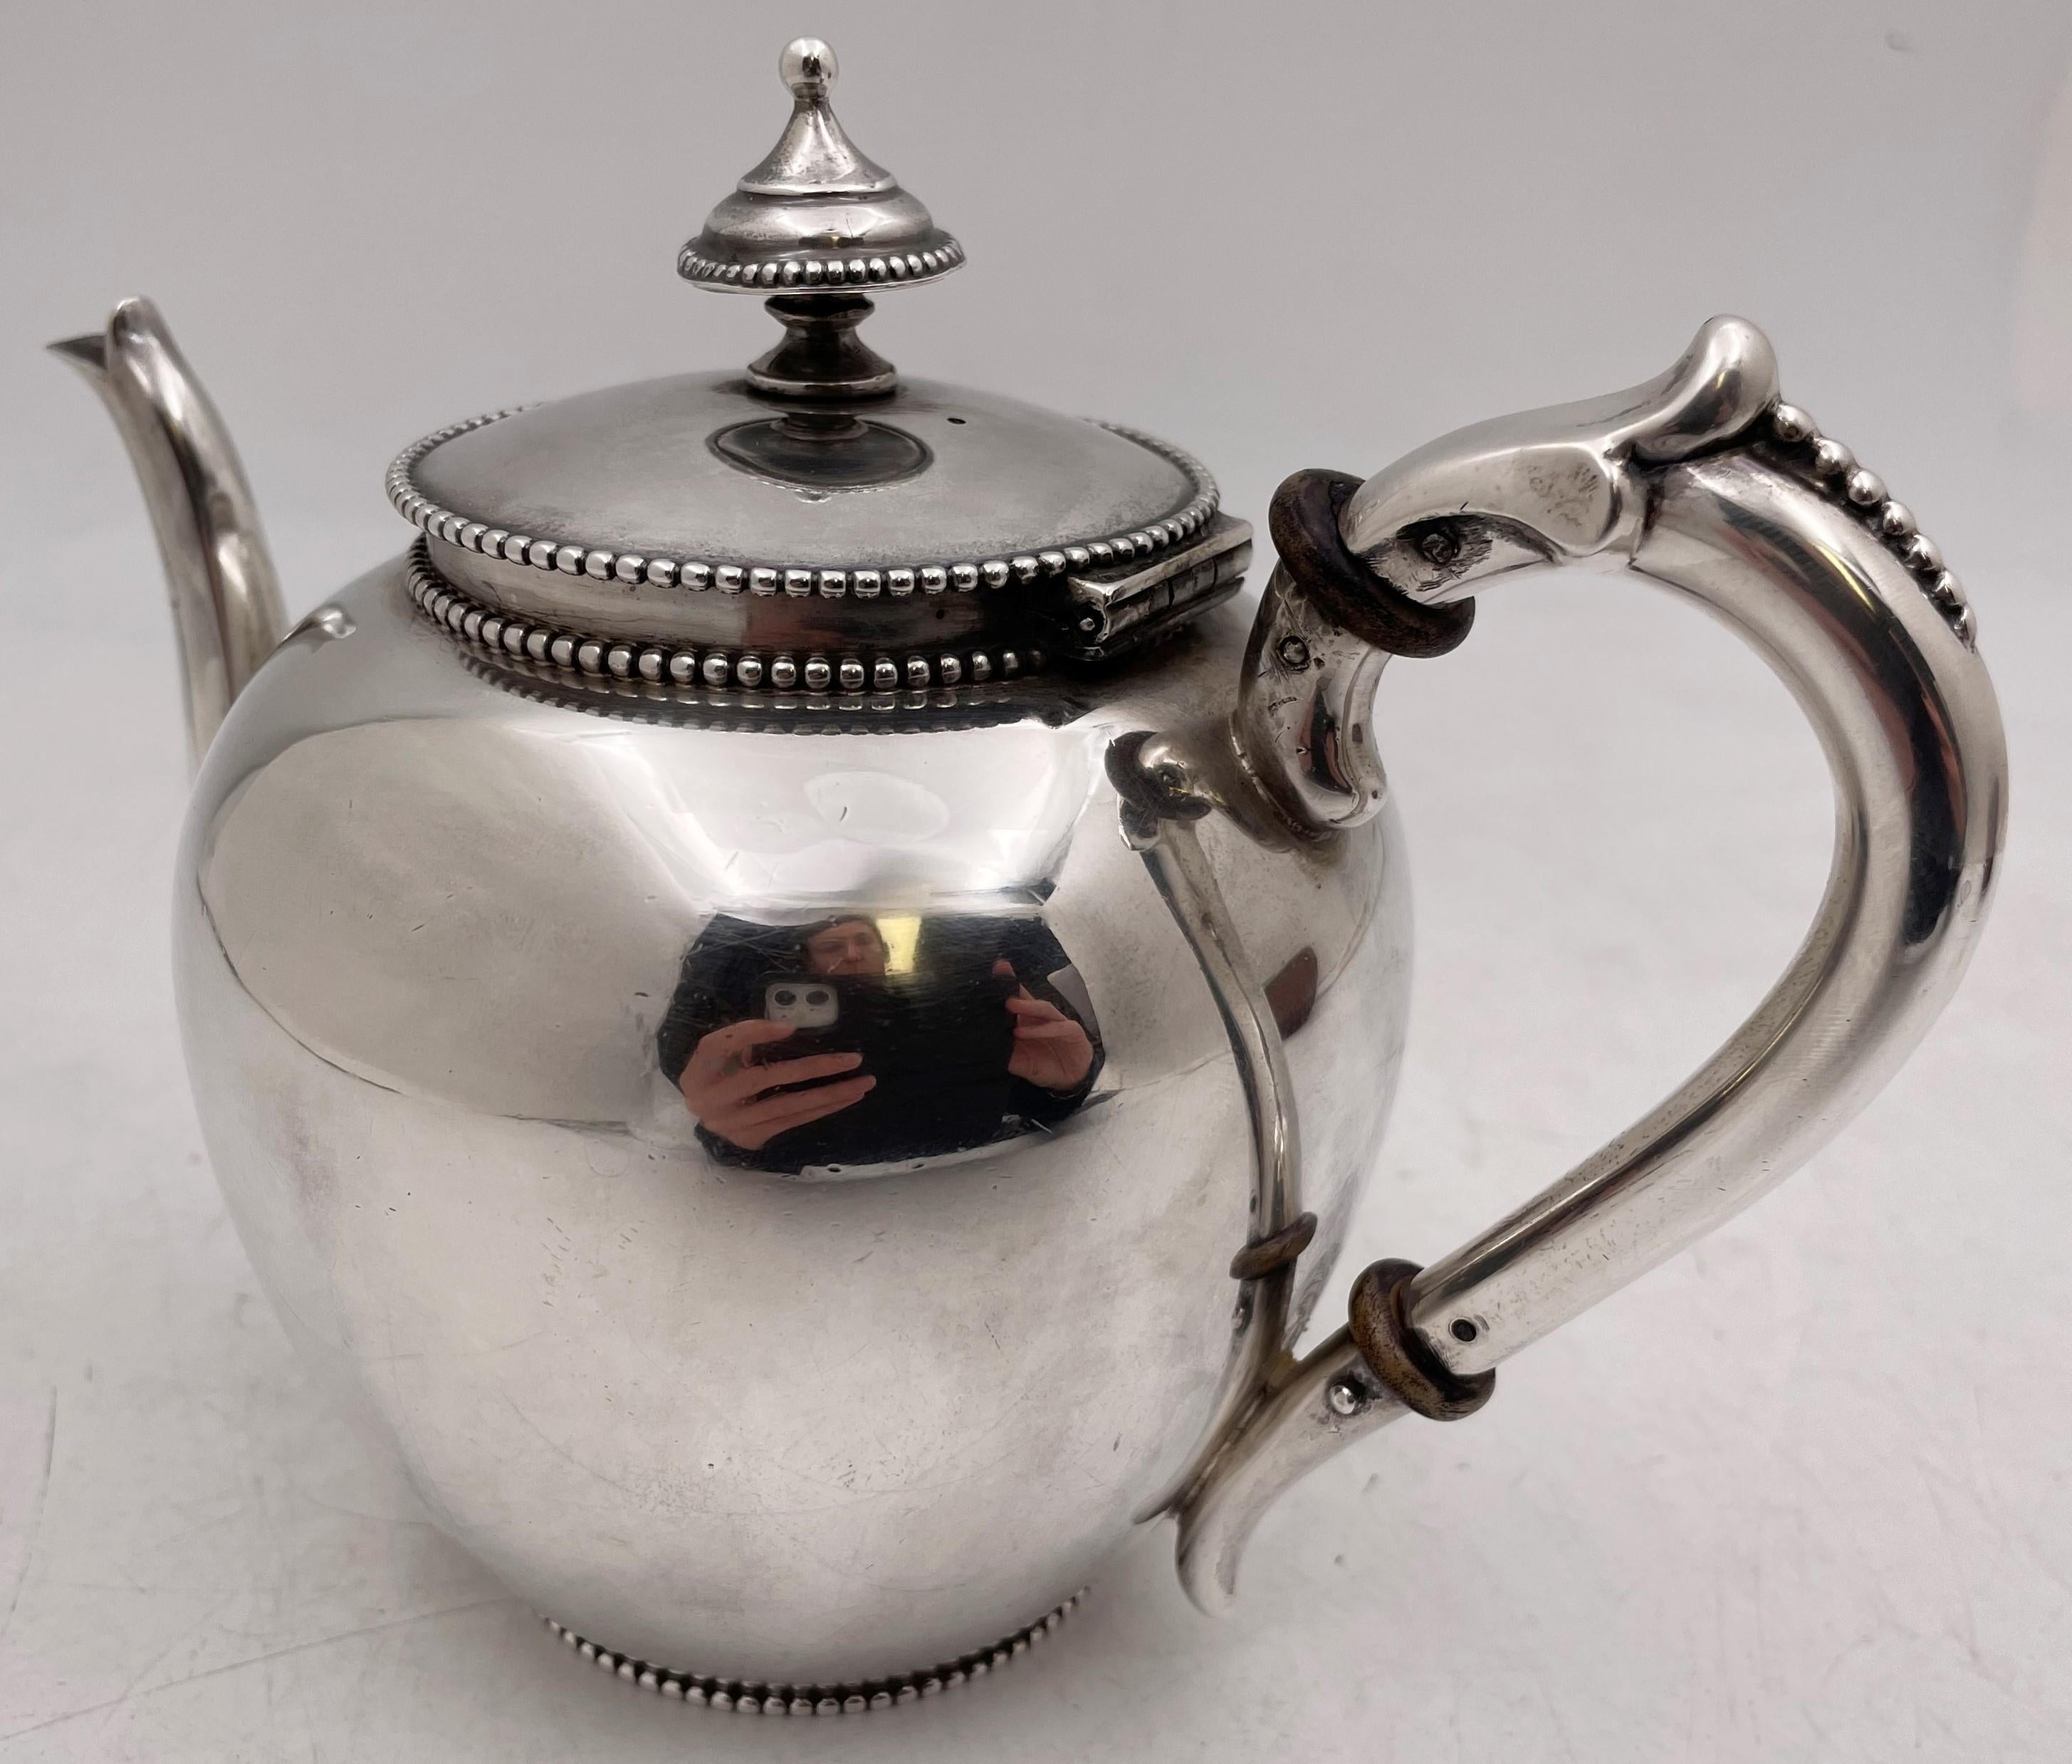 J. M. Van Kempen, Dutch continental silver teapot from the 19th century, with beaded motifs adorning the rim, base, and handle, and with an elegant design. It measures 5 3/4'' in height by 7 5/8'' from handle to spout by 4 3/8'' in depth, weighs